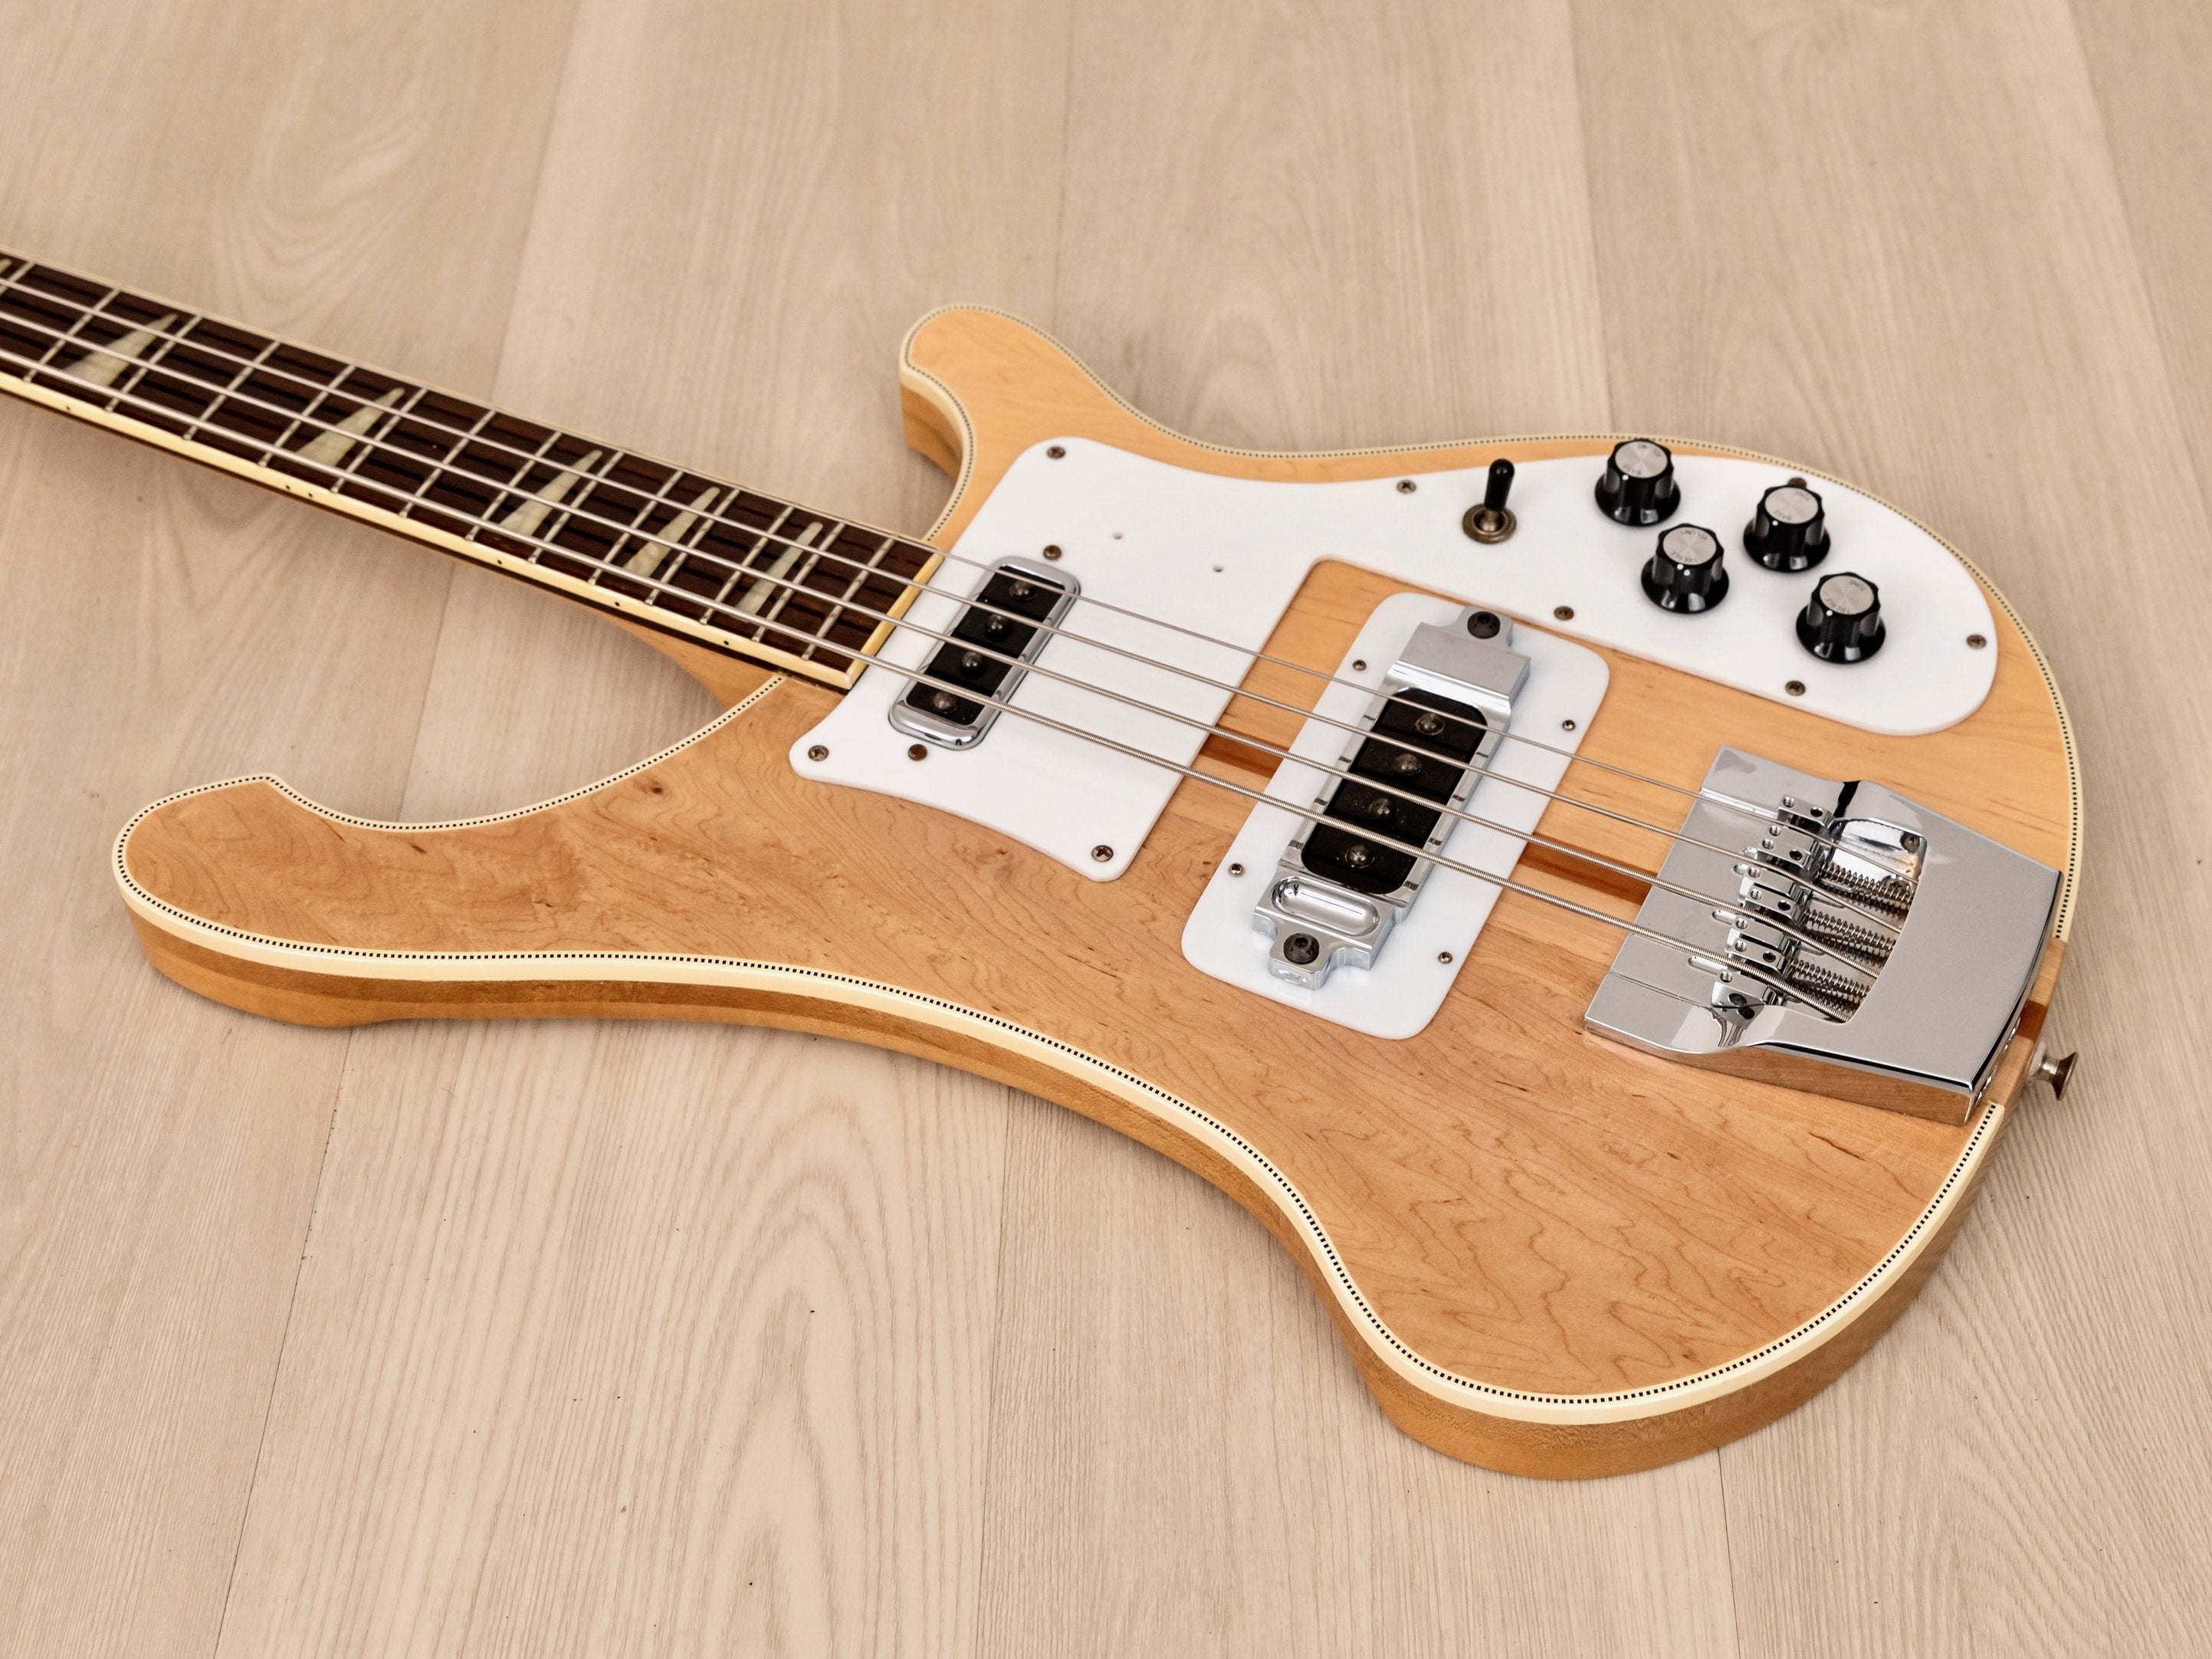 1978 Ibanez 2389B-NT Vintage Neck Through Bass, Mapleglo Rickenbacker 4001-Style w/ Case, Stereo Cable